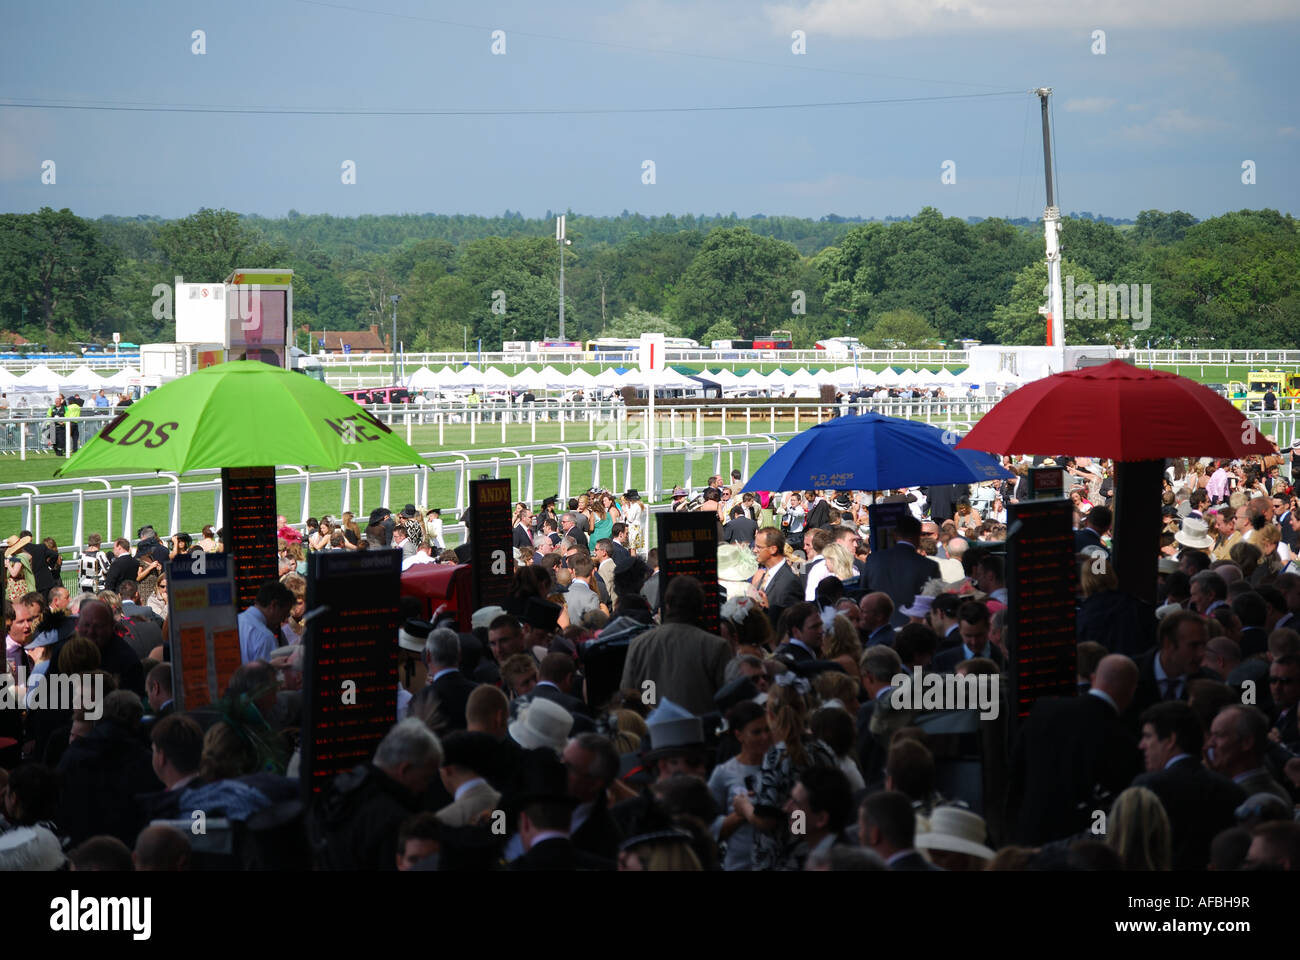 Grandstand showing bookmakers, Royal Ascot Meeting, Ascot Racecourse, Ascot, Berkshire, England, United Kingdom Stock Photo